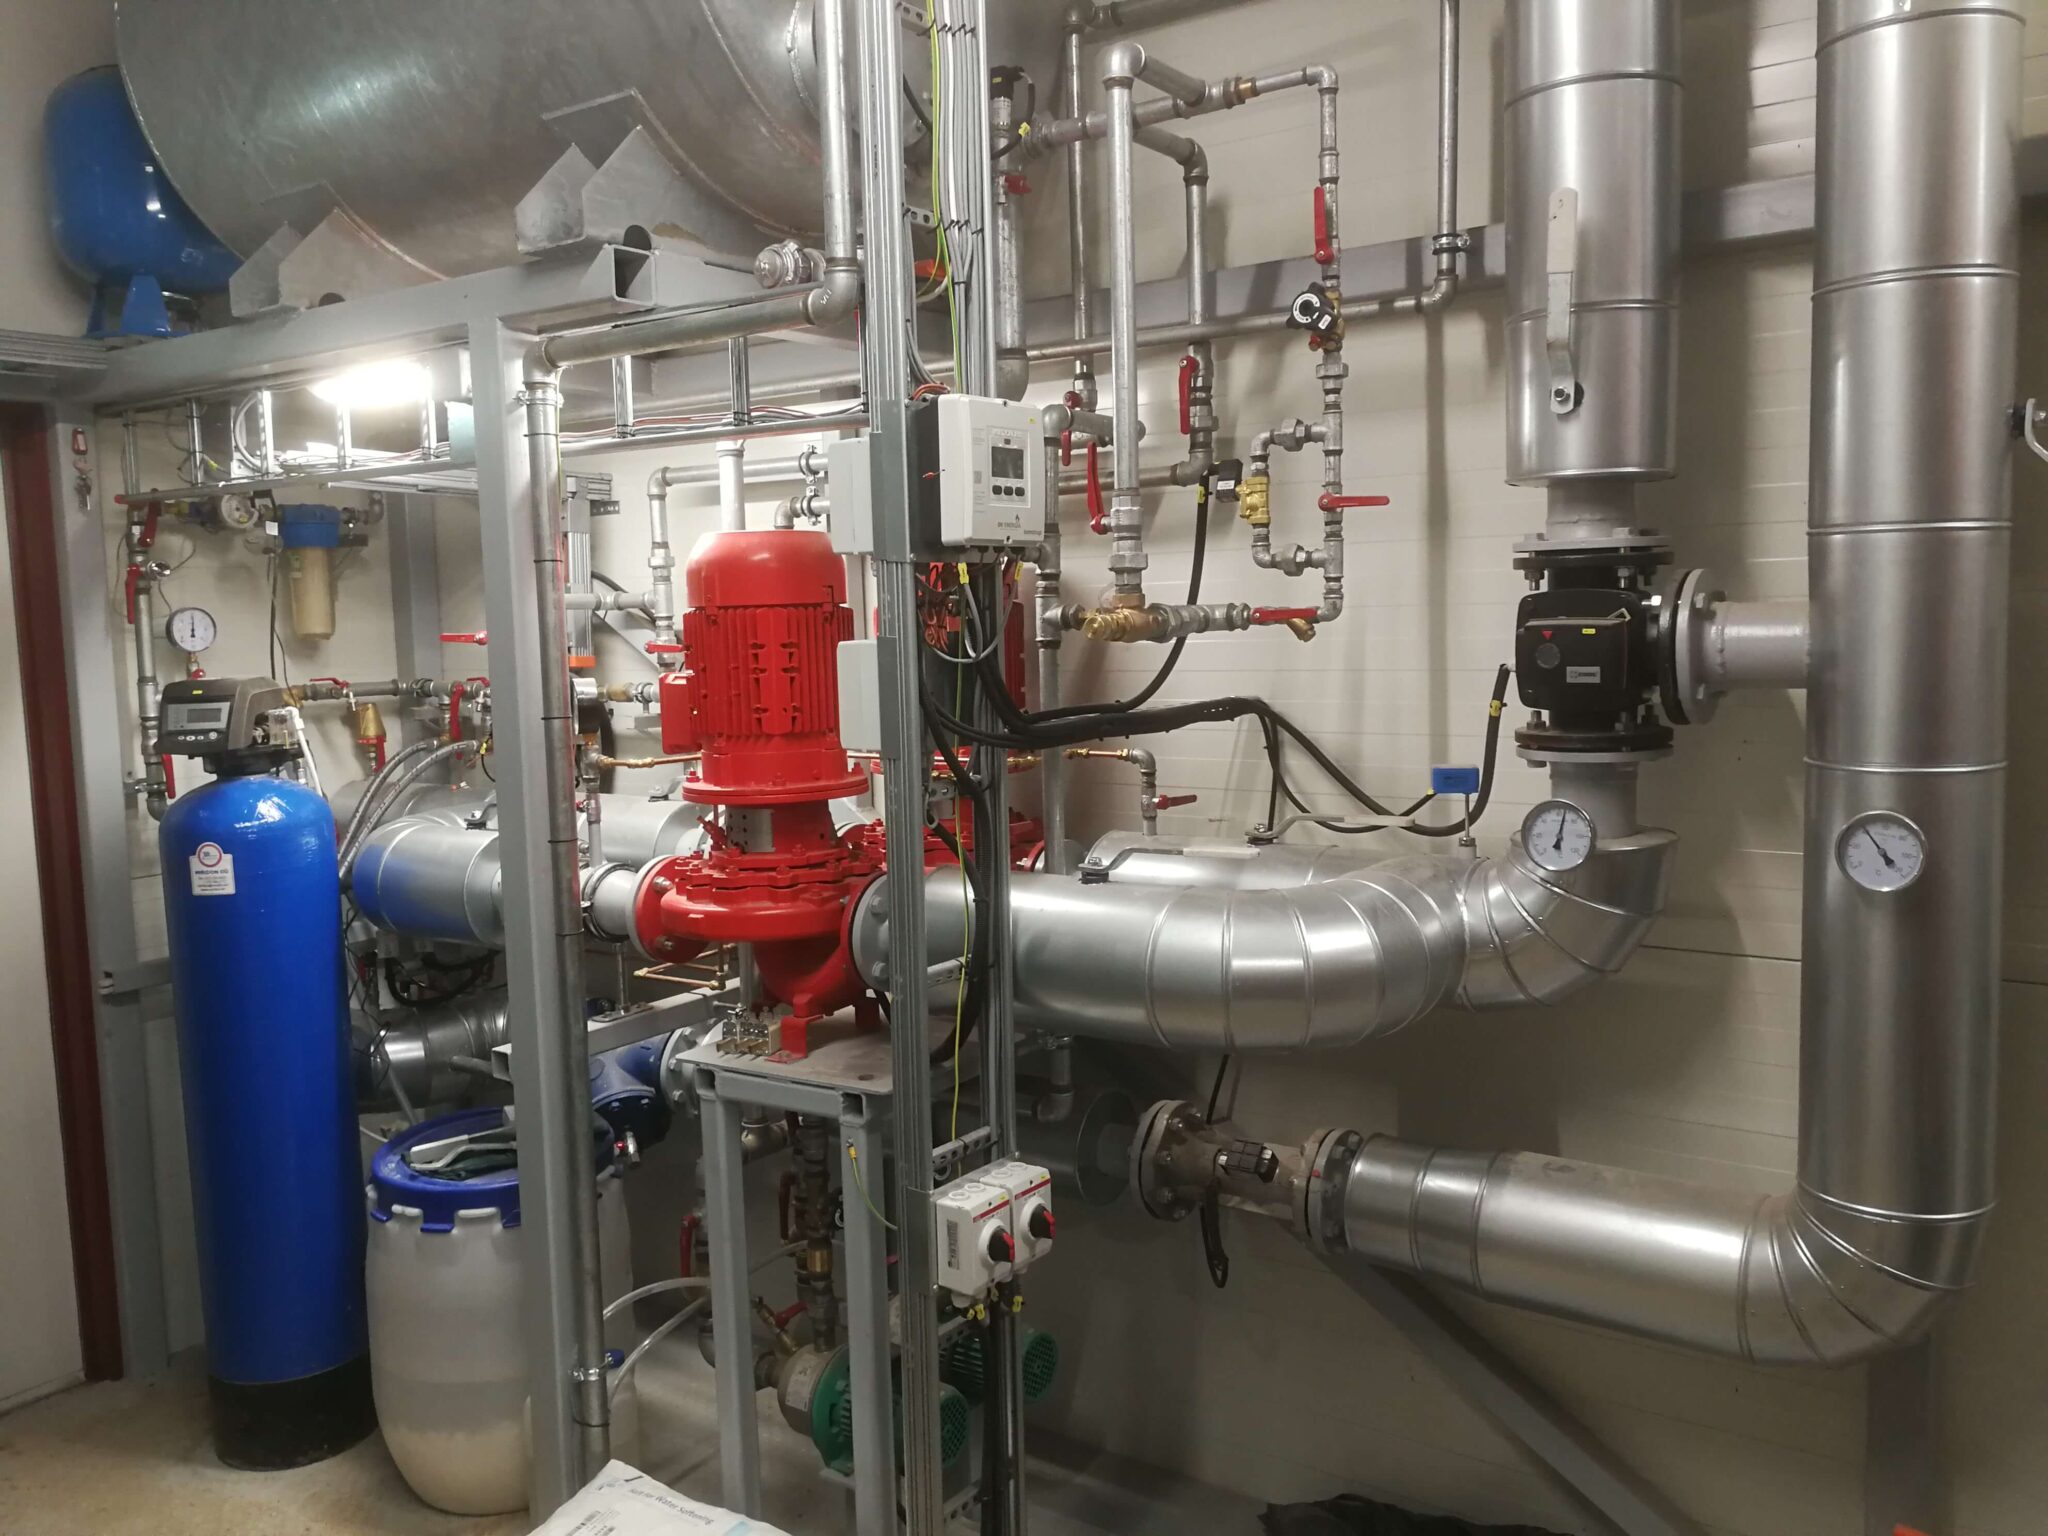 boiler house piping system